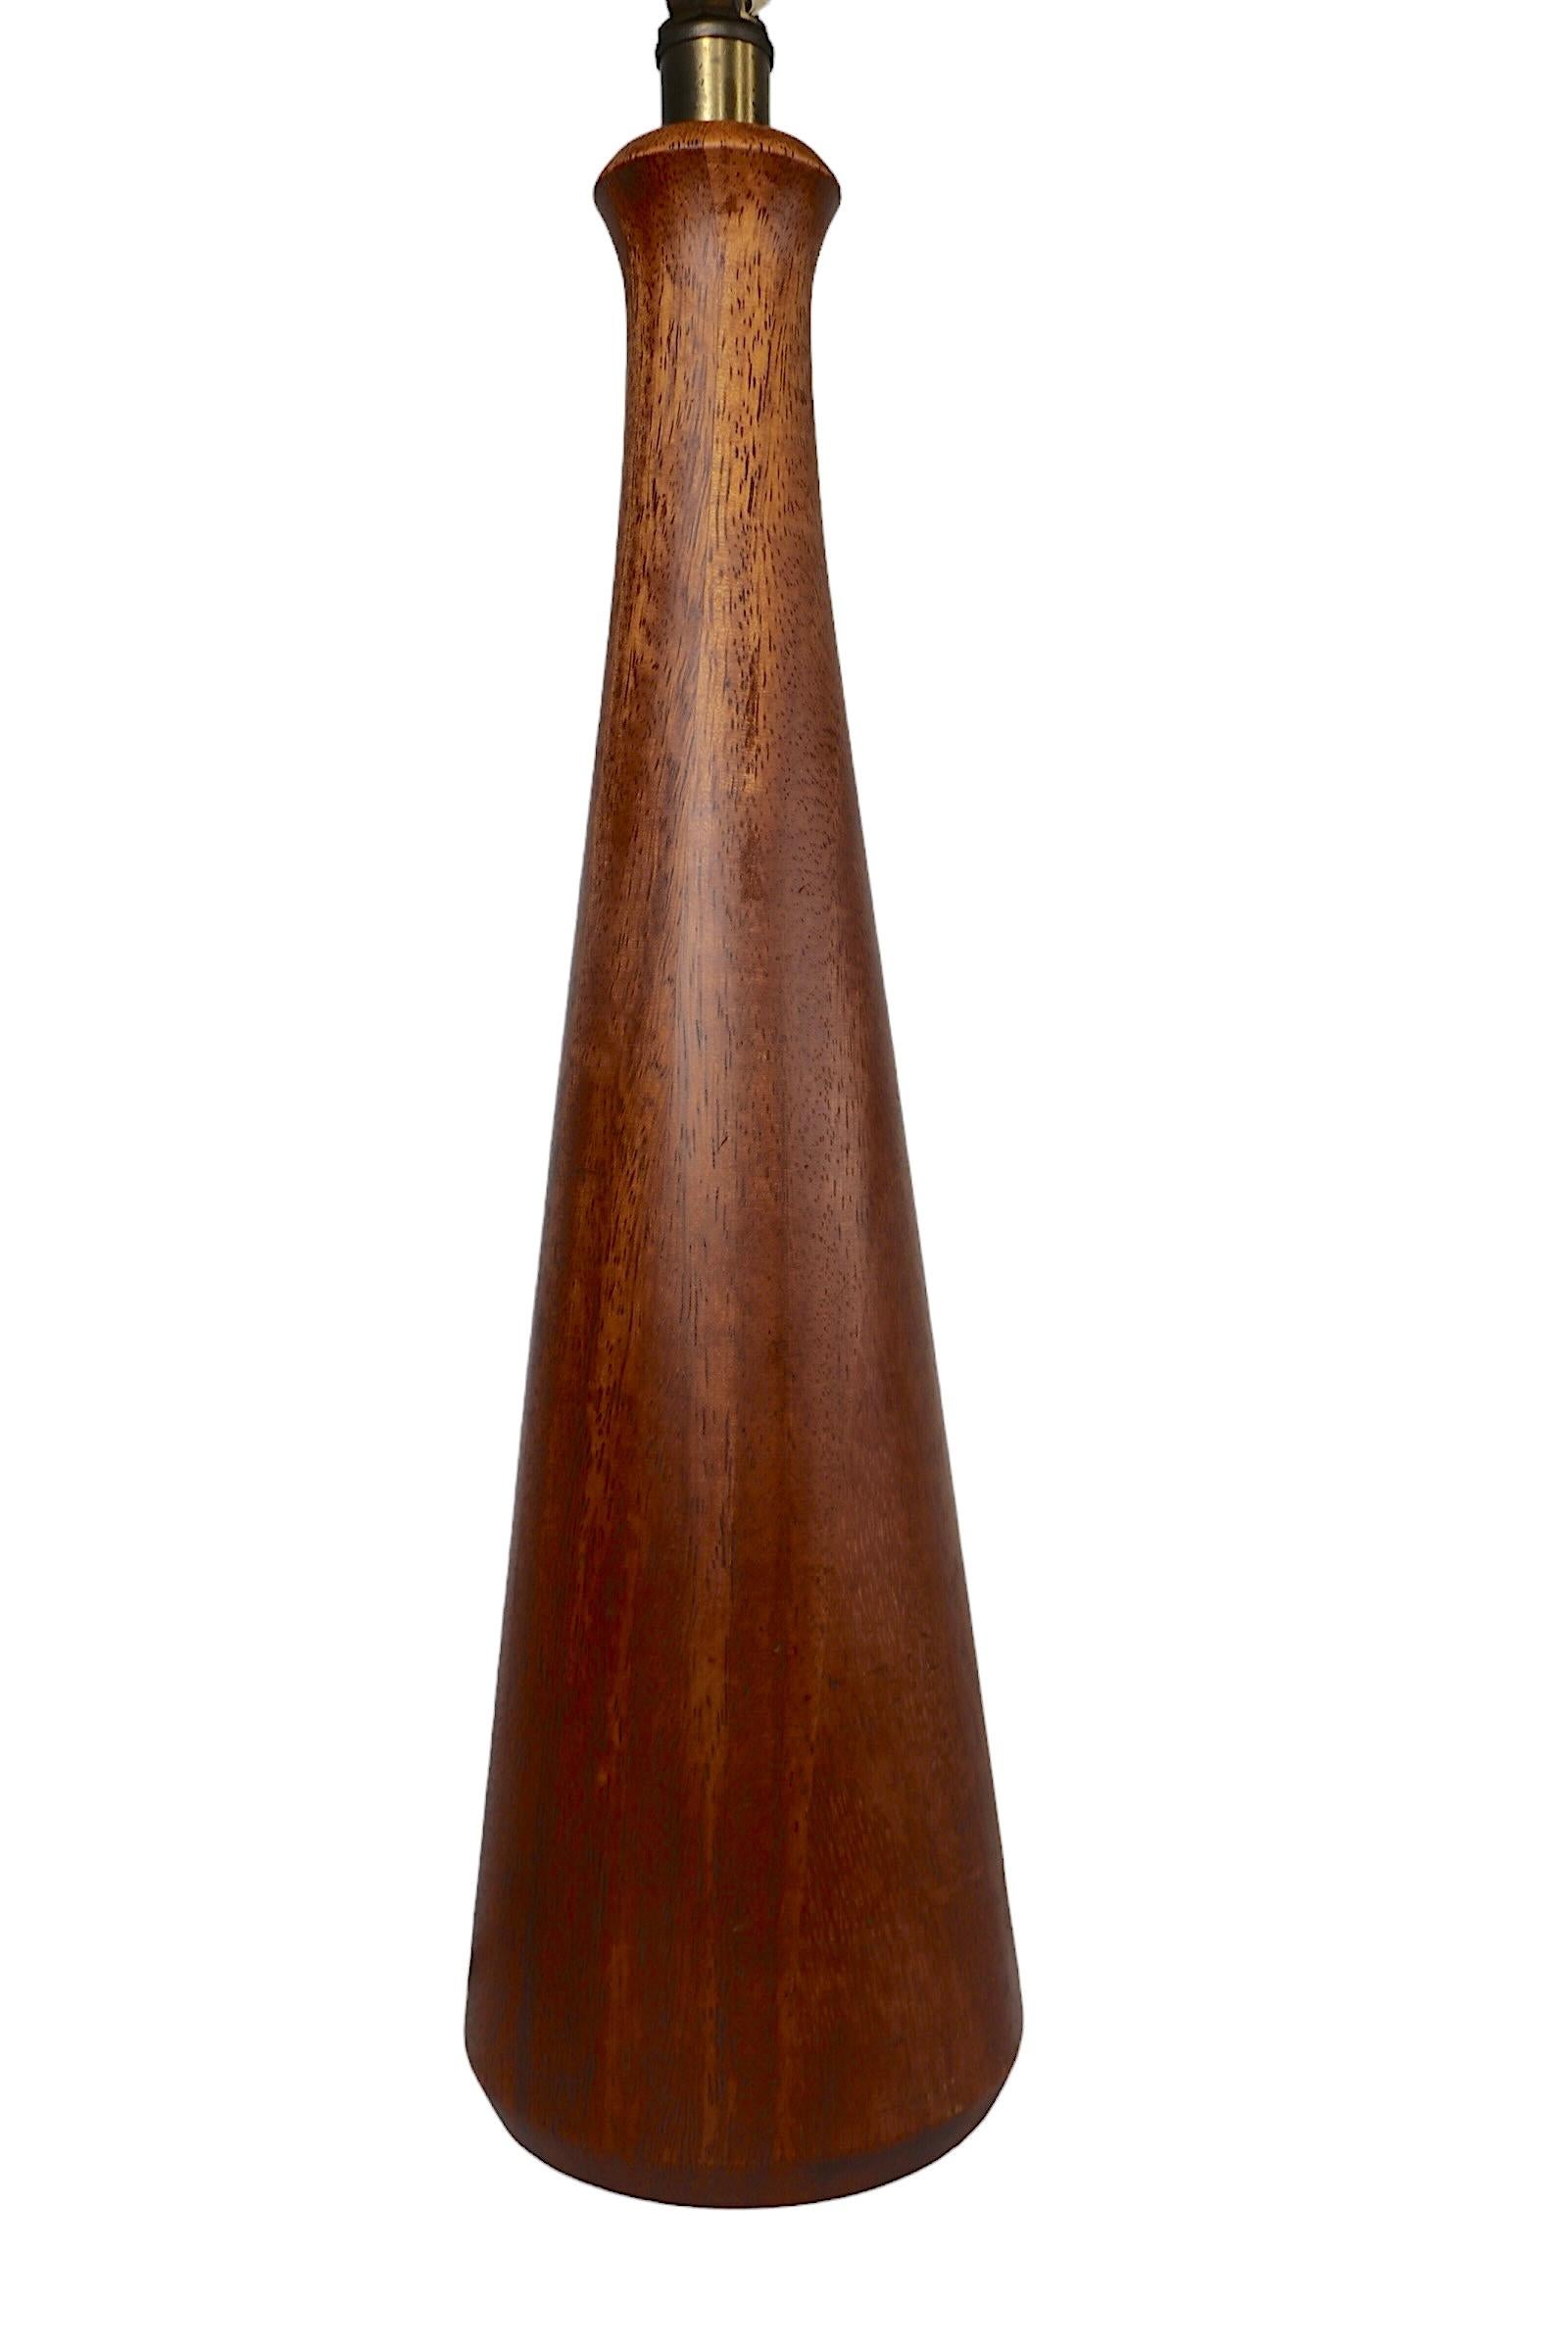  Danish Style Mid Century Wood Table Lamp c 1950/60's For Sale 3